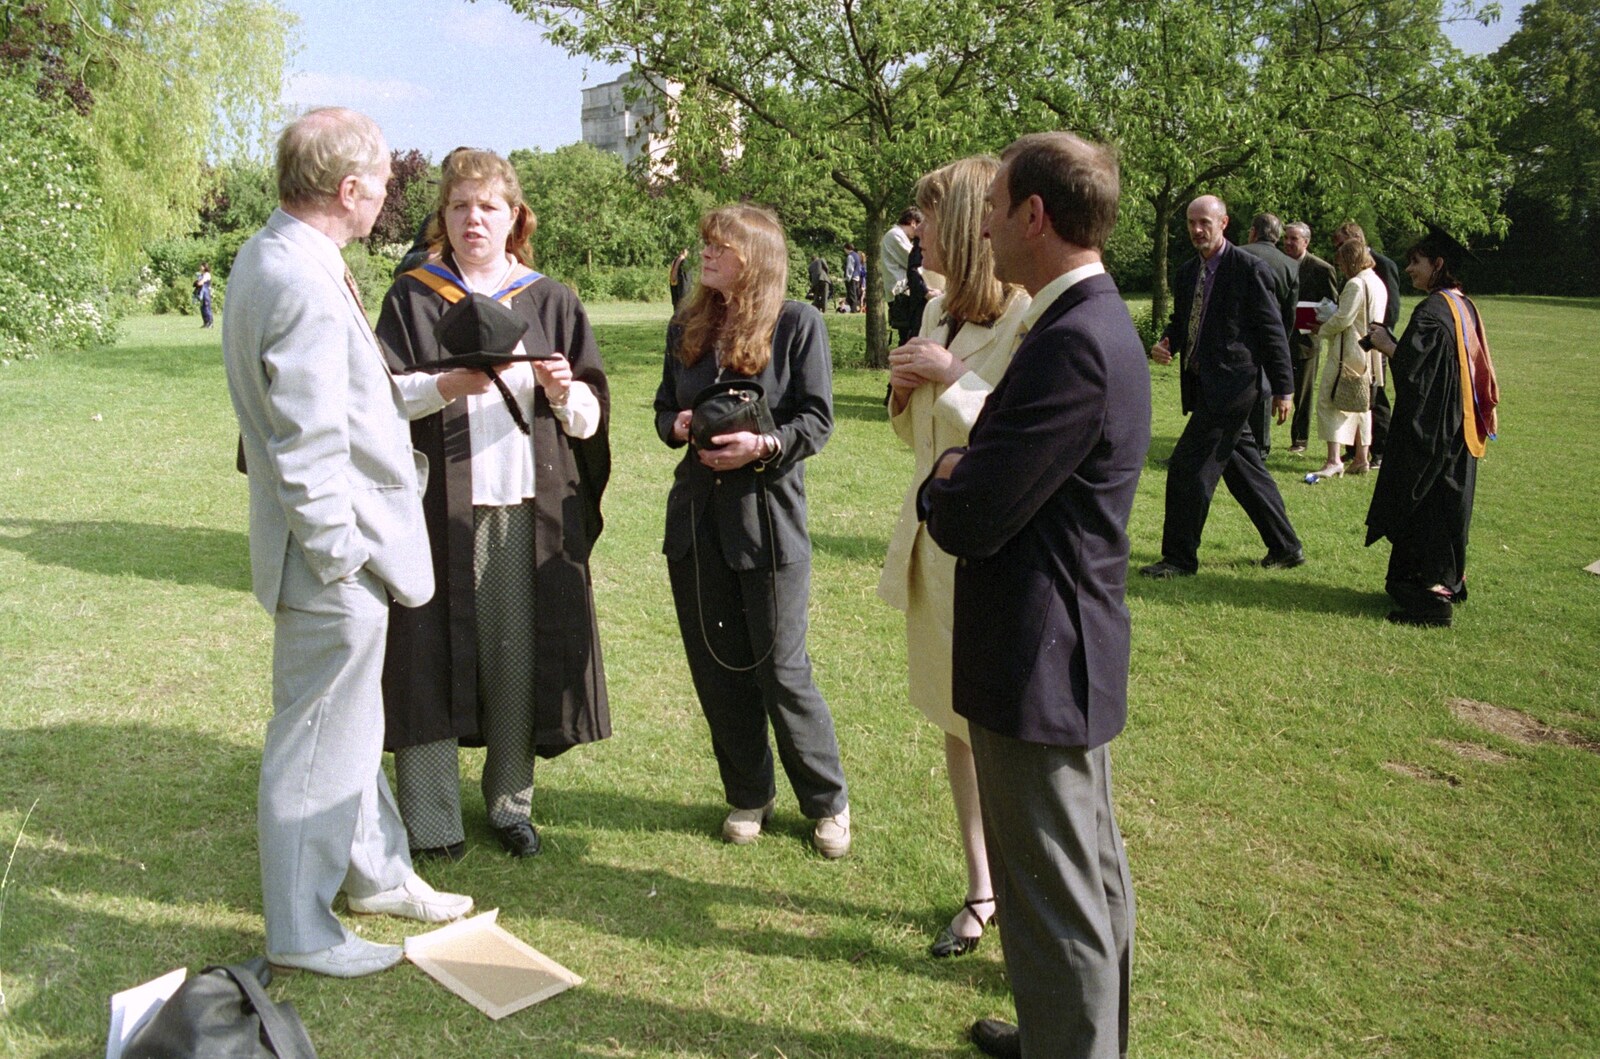 Sis Graduates from De Montfort, Leicester, Leicestershire - 9th August 1997: Dad chats to Sis as Mother and Mike hang around